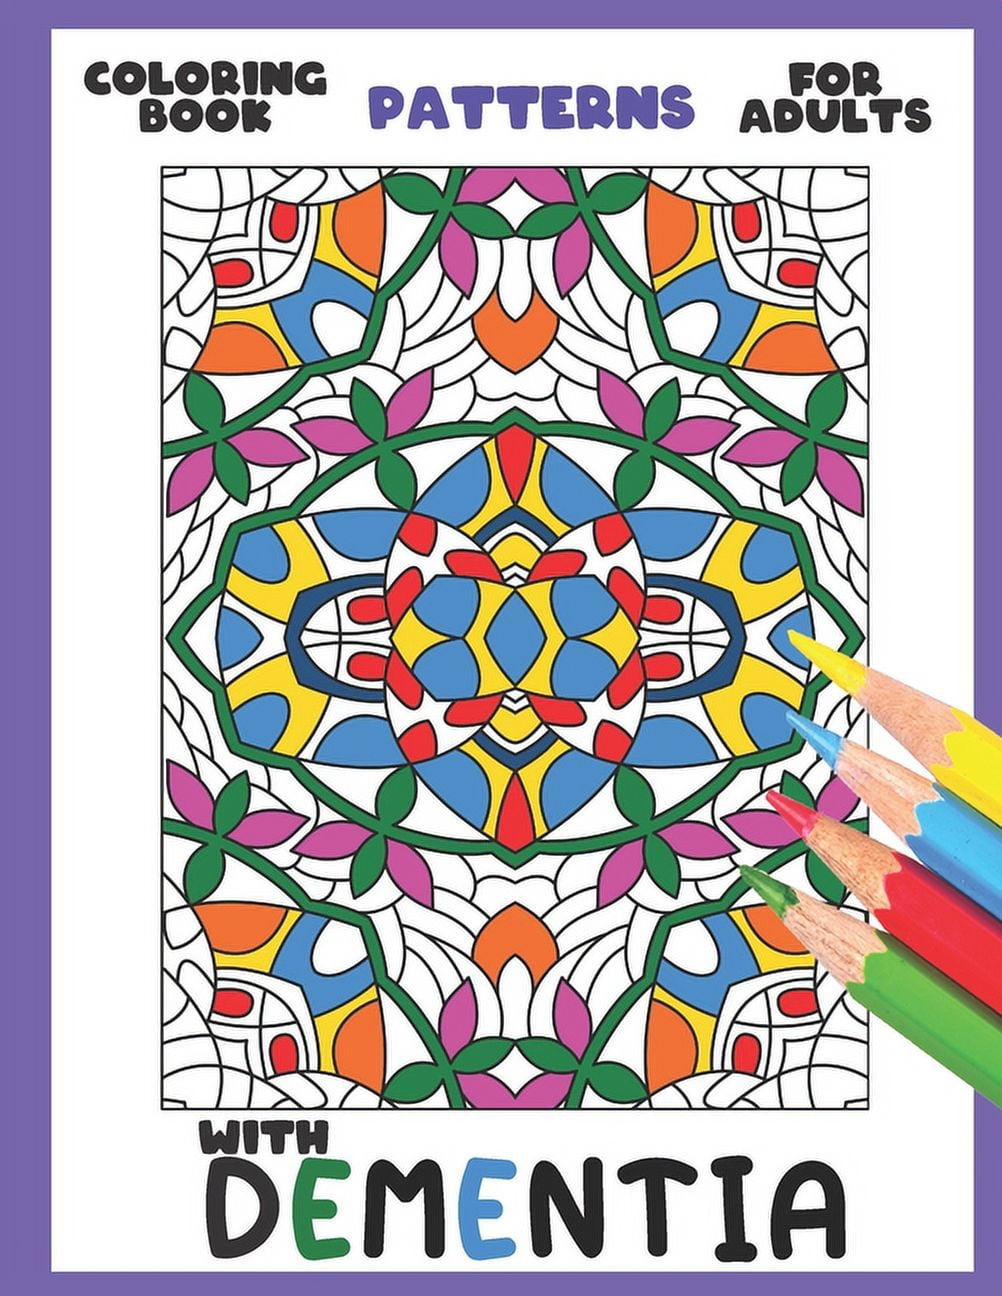 Best Coloring Books for People With Dementia: 5 Things to Look for